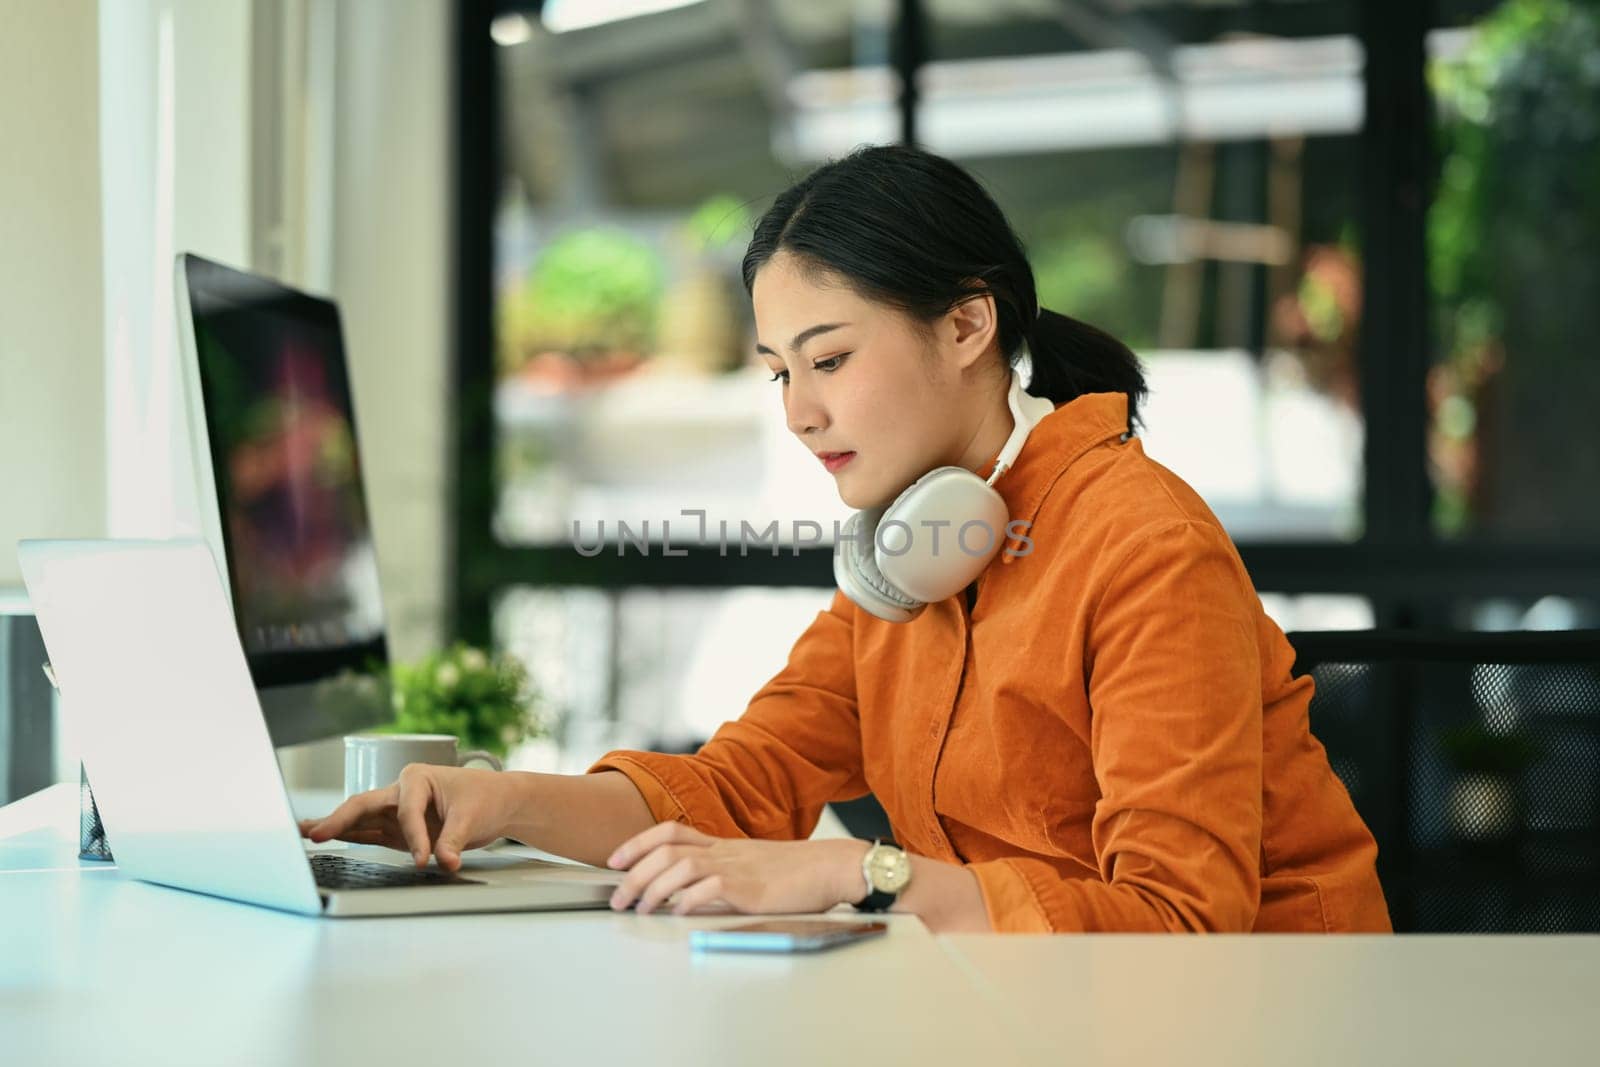 Focused young creative woman with headphone on her neck working on laptop at modern office.